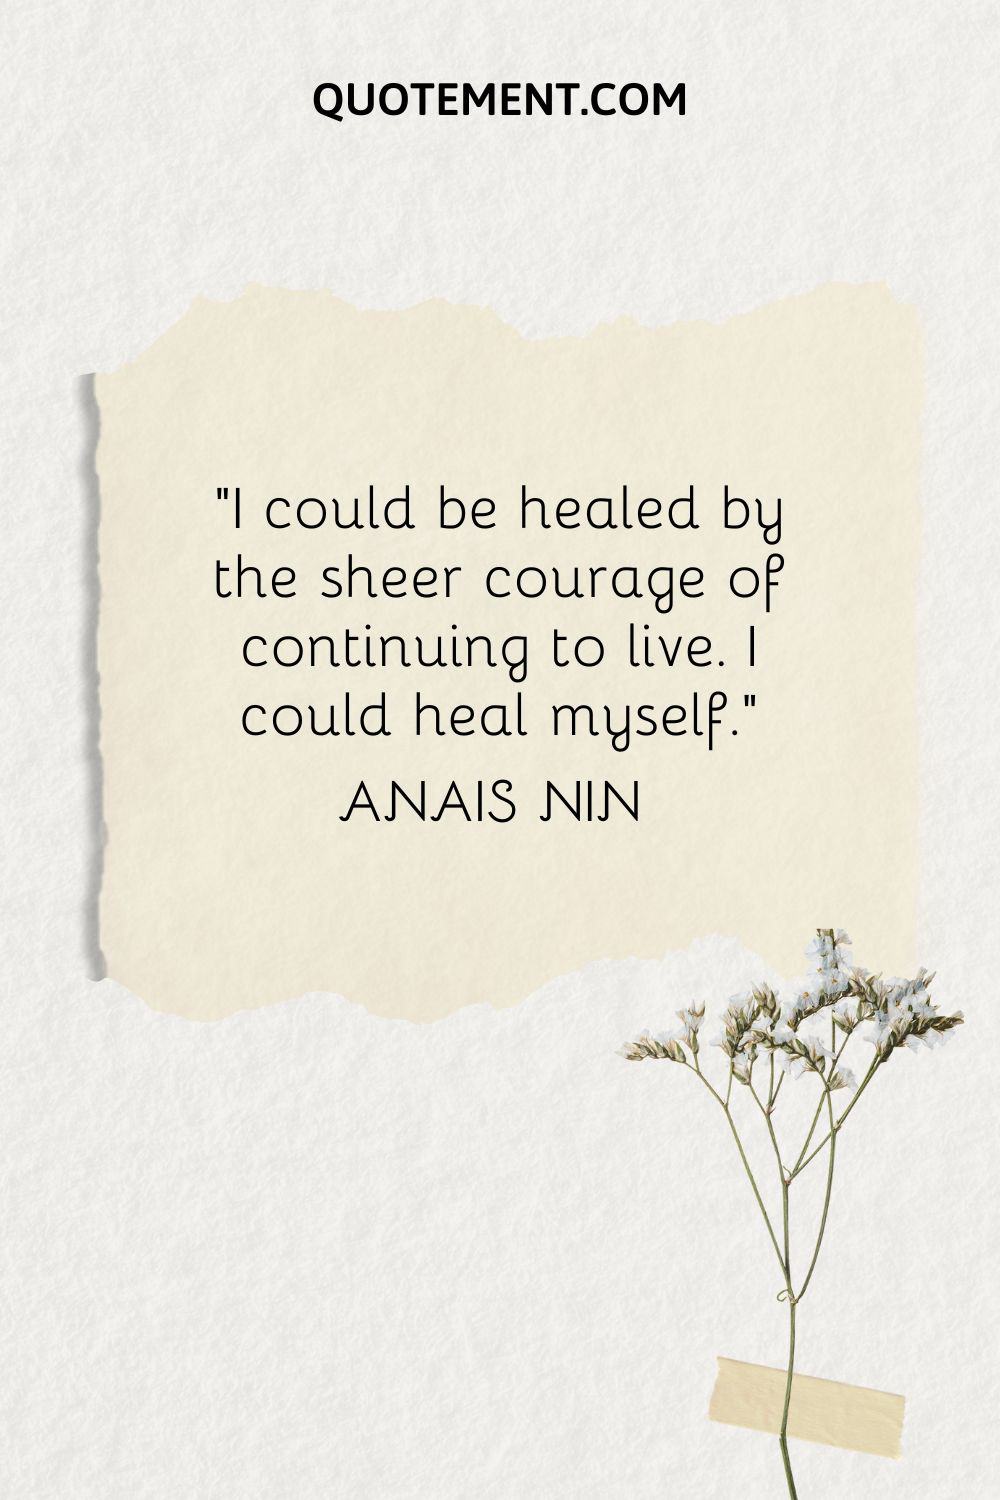 I could be healed by the sheer courage of continuing to live. I could heal myself. — Anais Nin